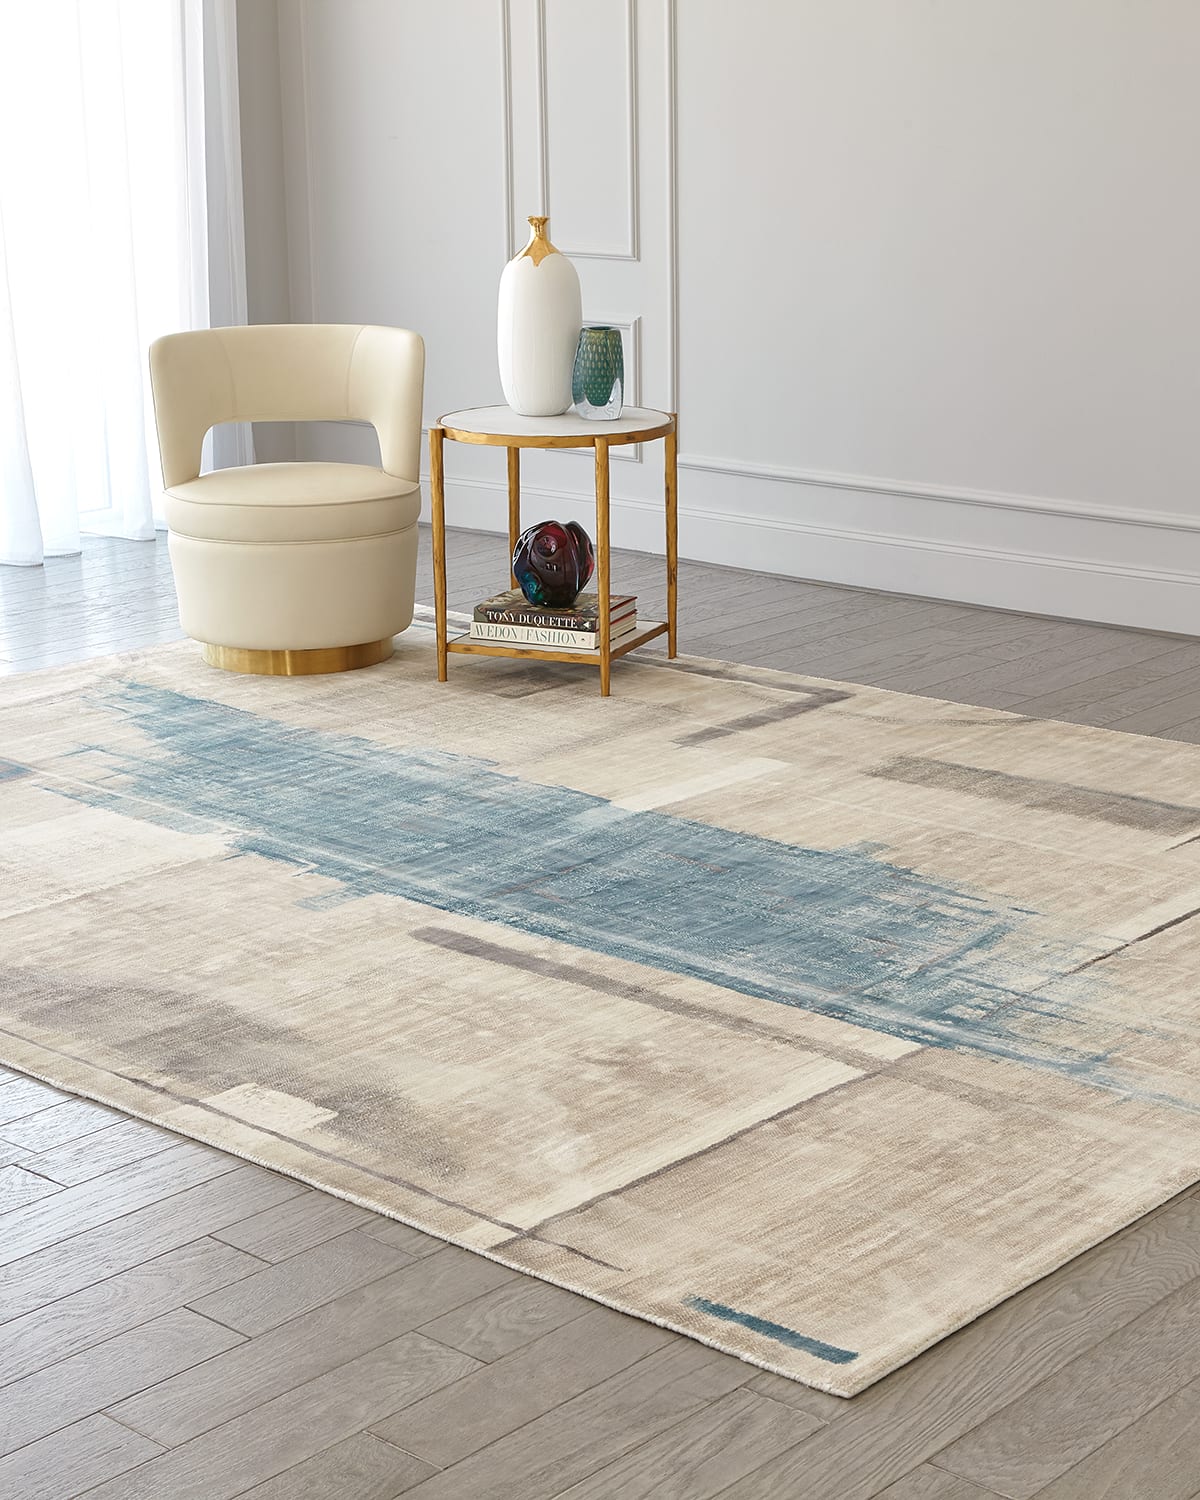 George Sellers For Global Views Art Hand-woven Rug, 8' X 10'